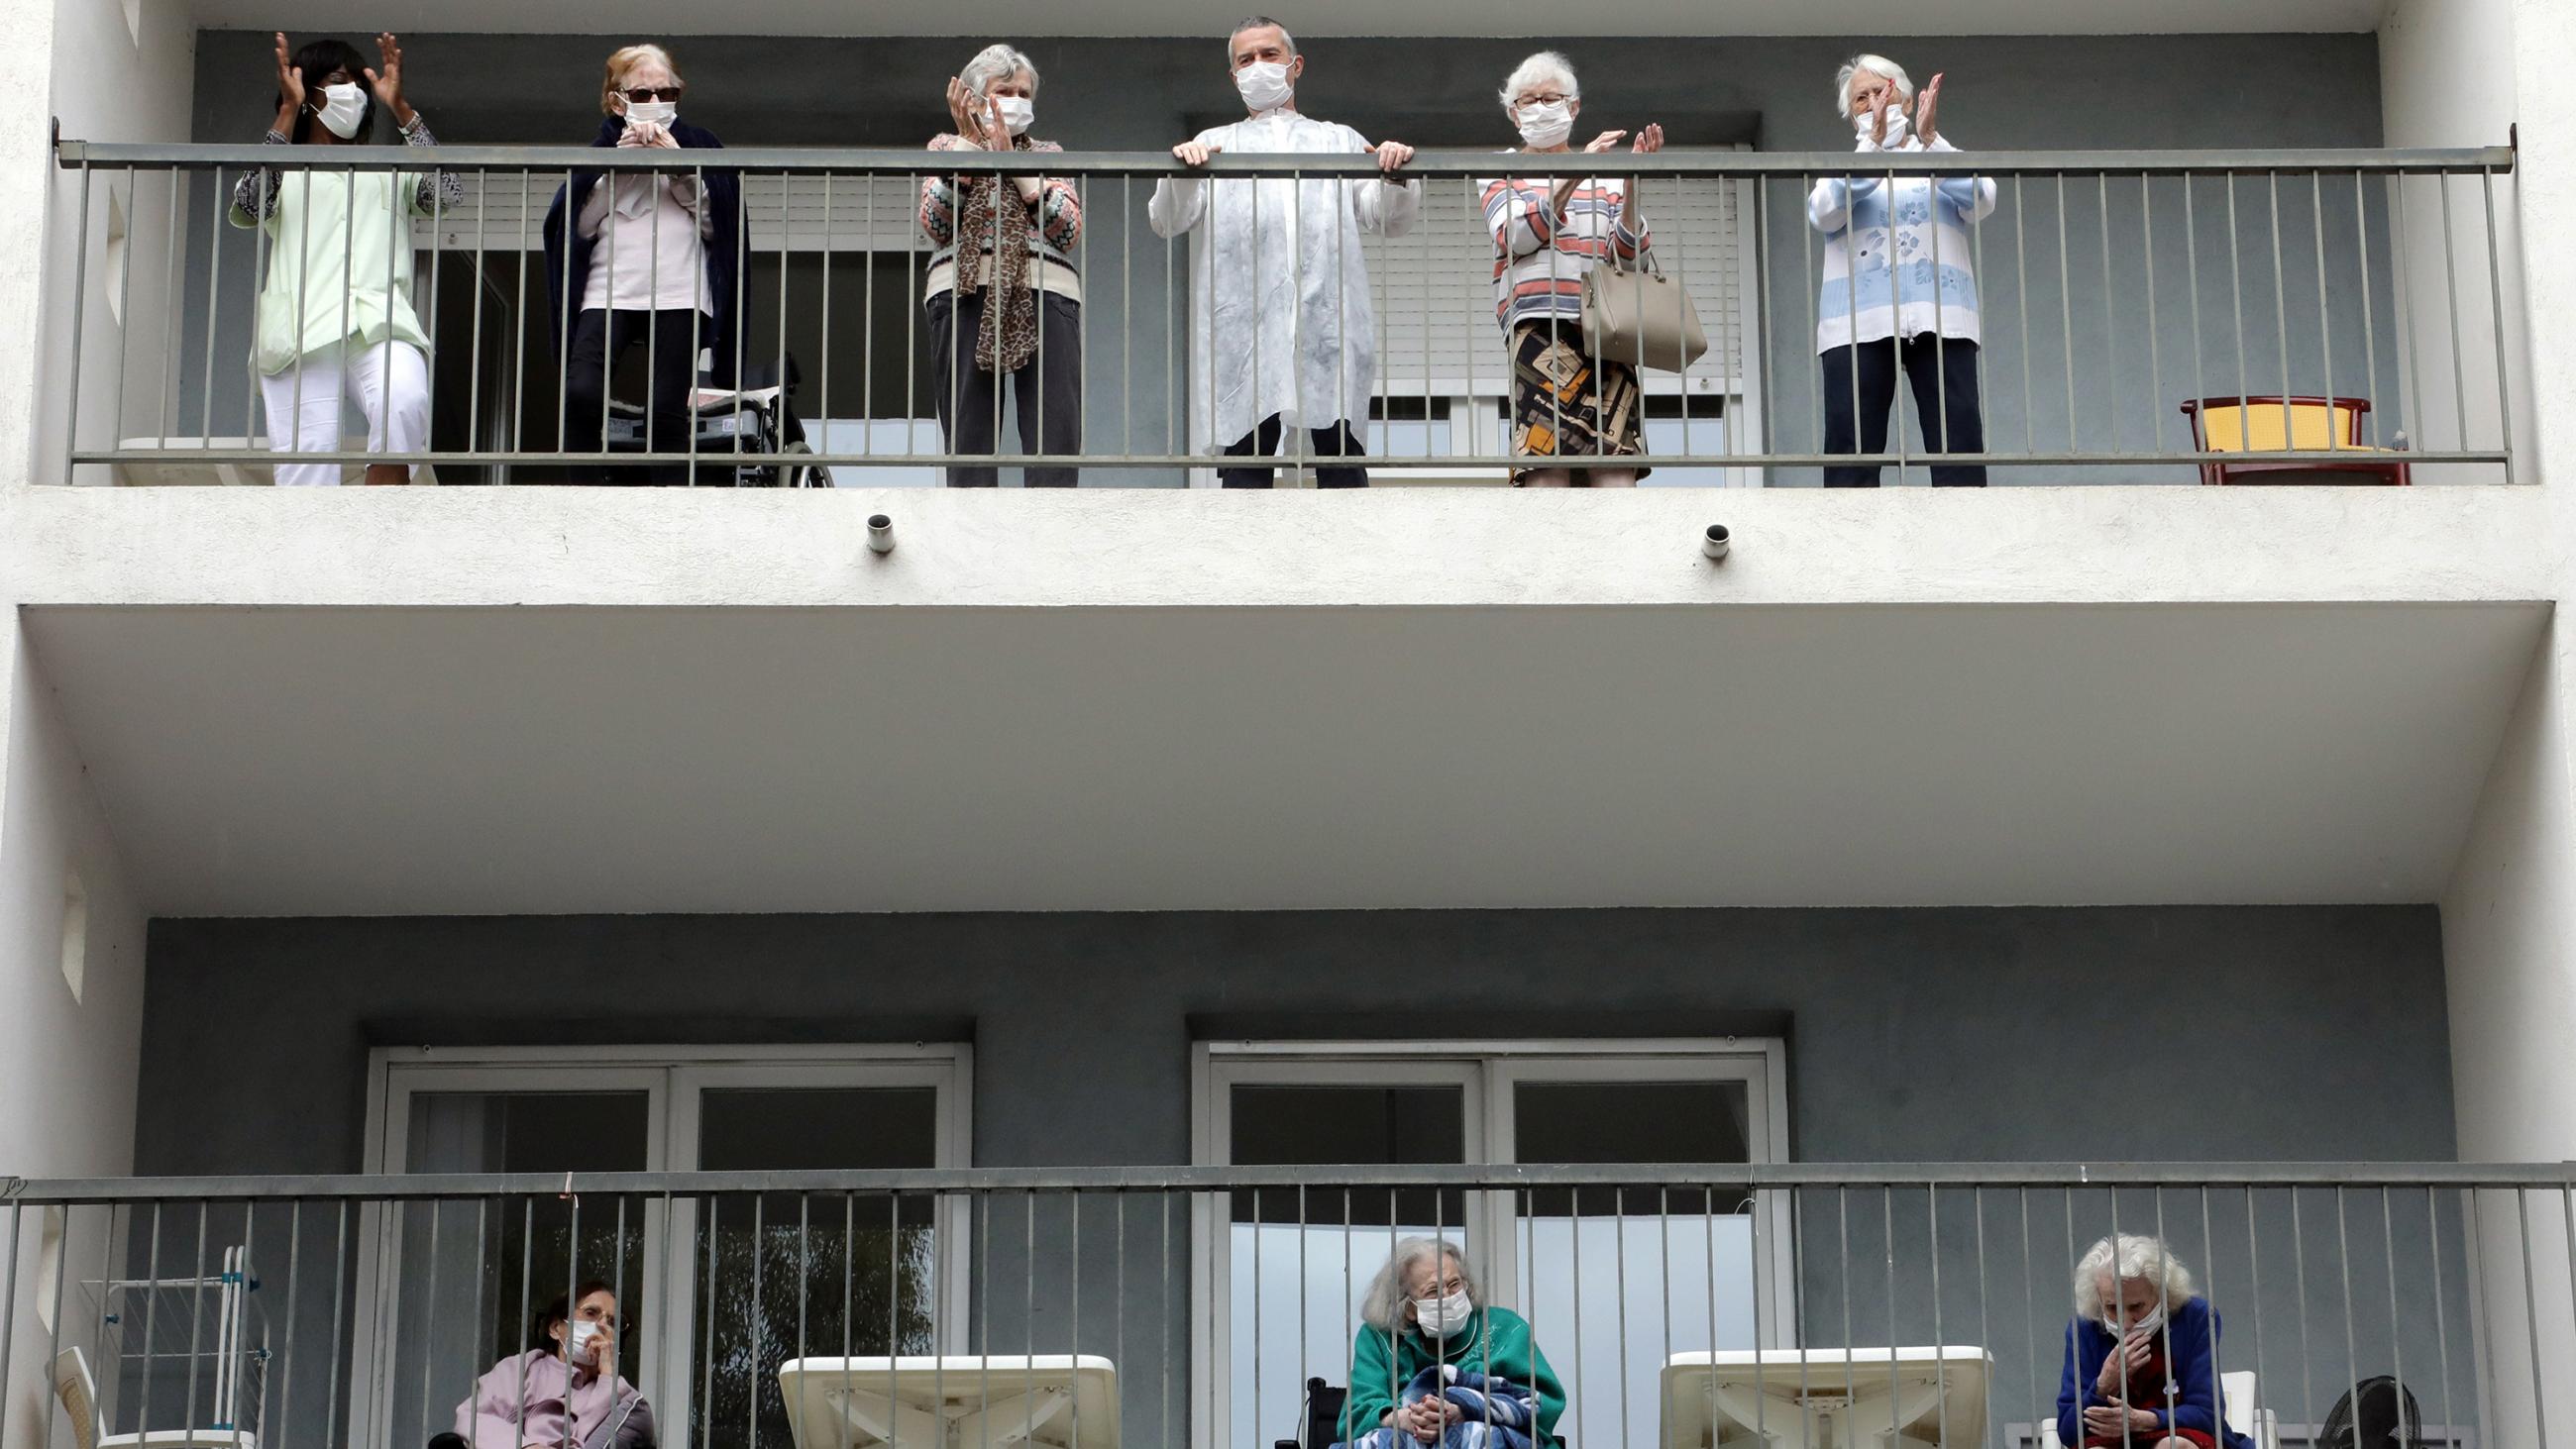 The photo shows two rows of balconies lined with elderly people watching the performance. 